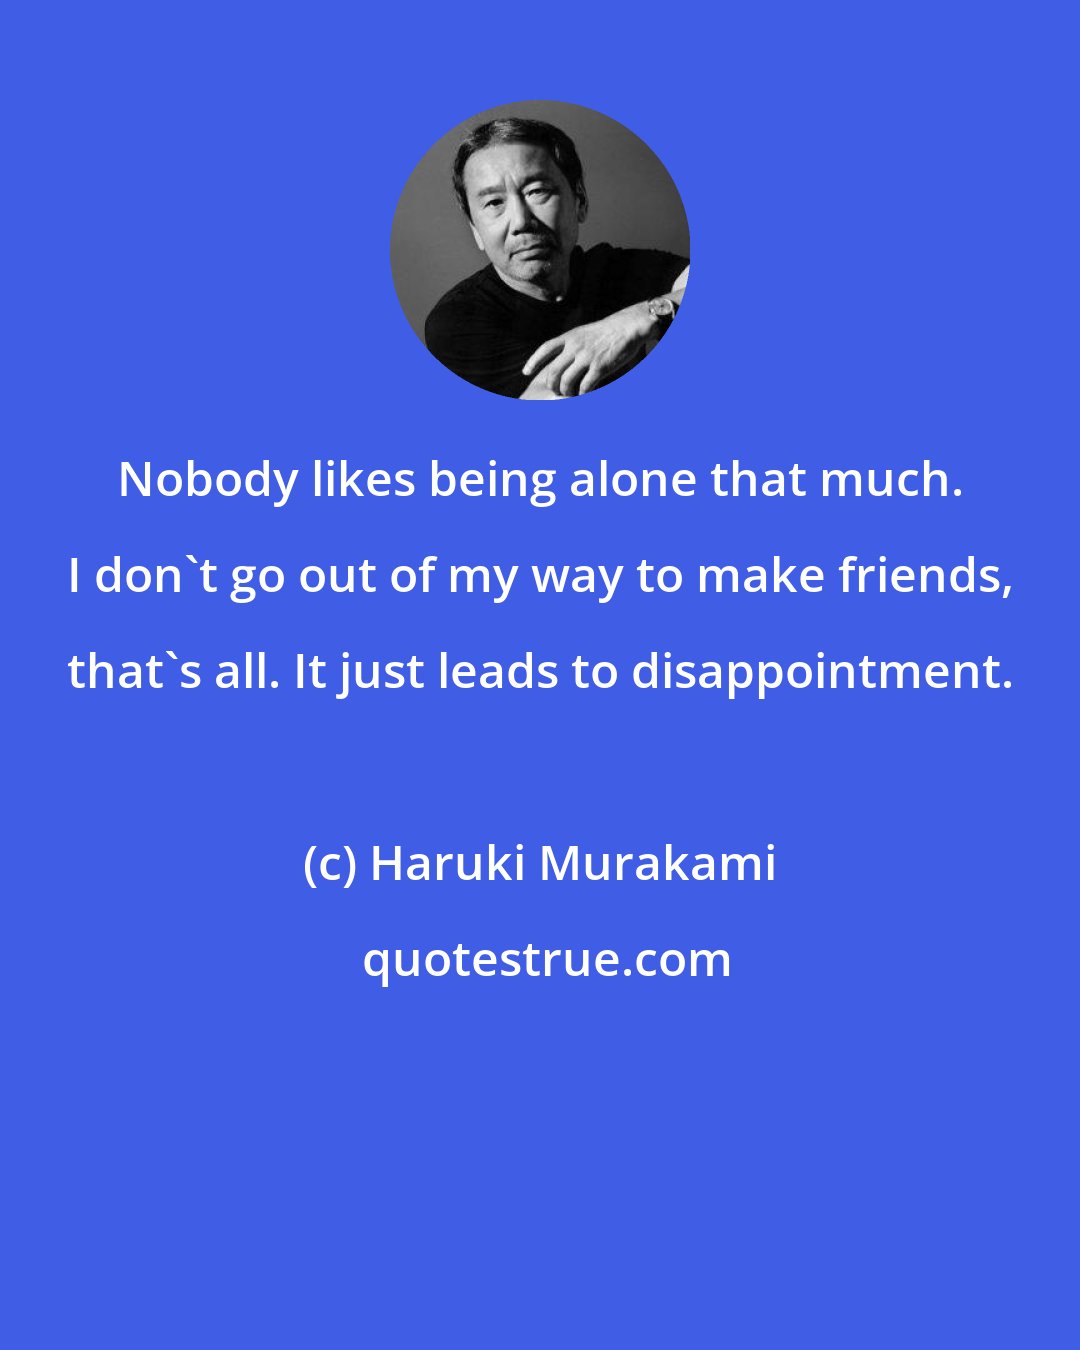 Haruki Murakami: Nobody likes being alone that much. I don't go out of my way to make friends, that's all. It just leads to disappointment.